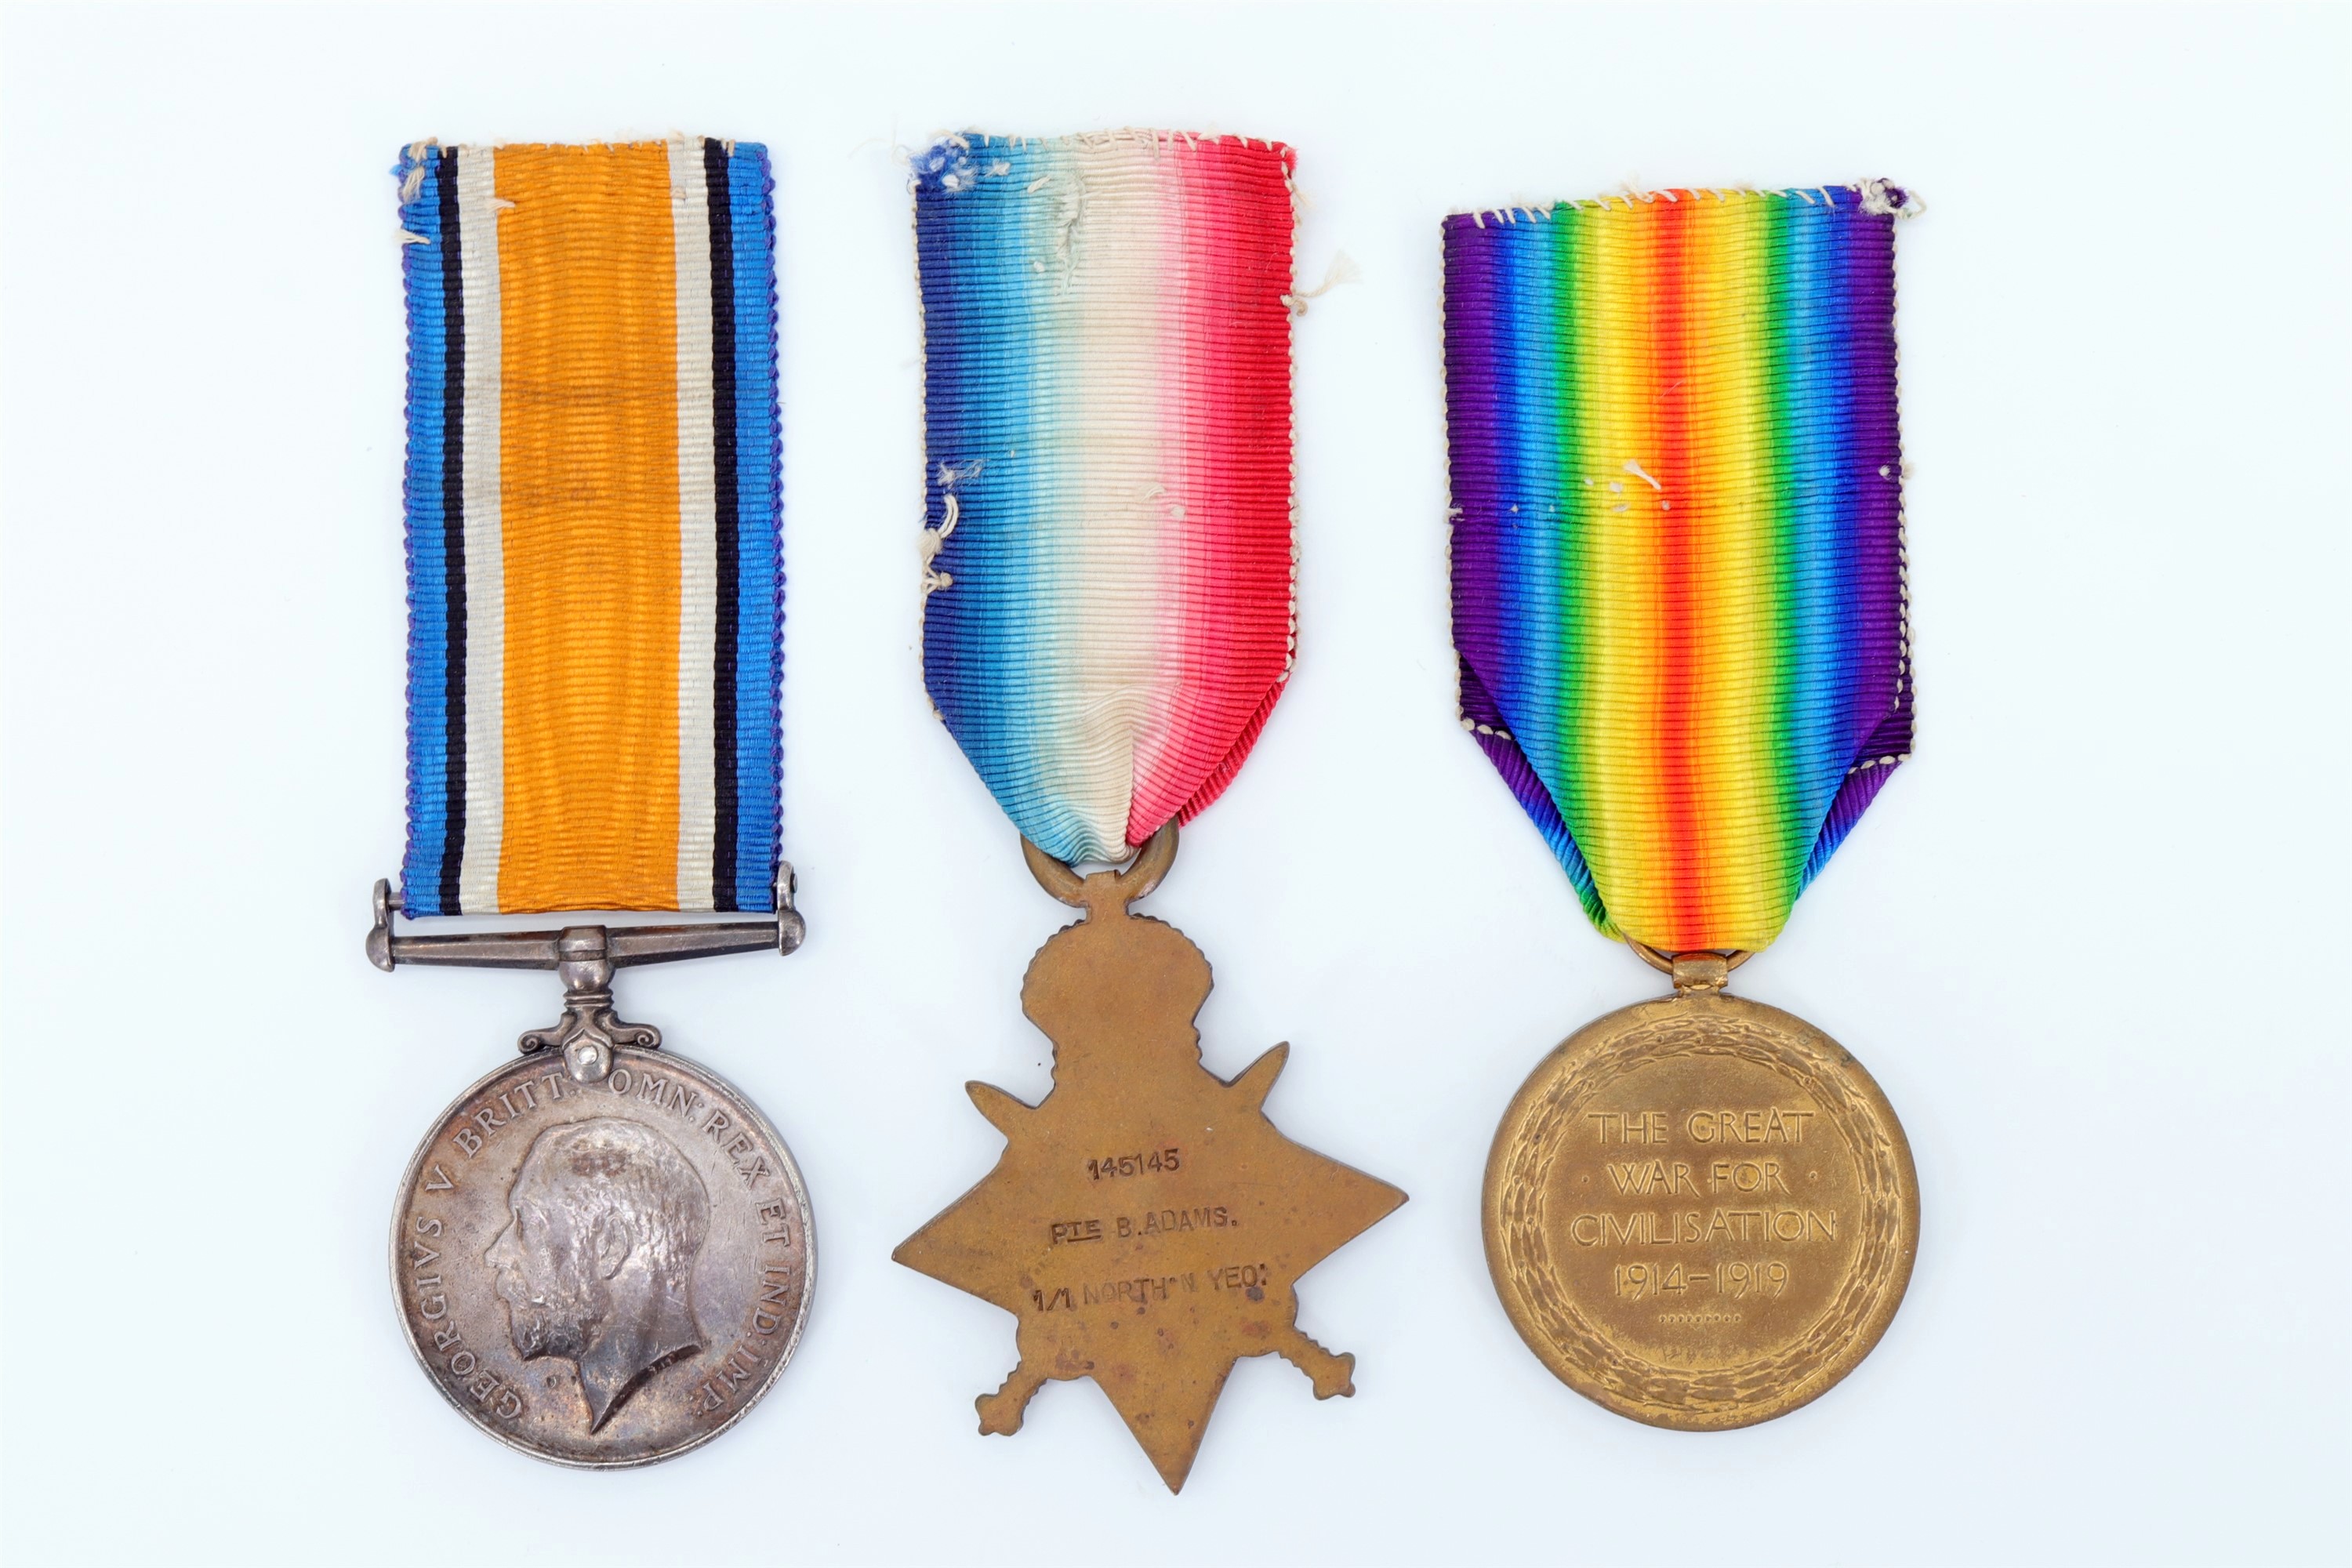 A 1914 Star with clasp, British War and Victory medals to 145145 Pte B Adams / 785 Pte B W Adams, - Image 2 of 5